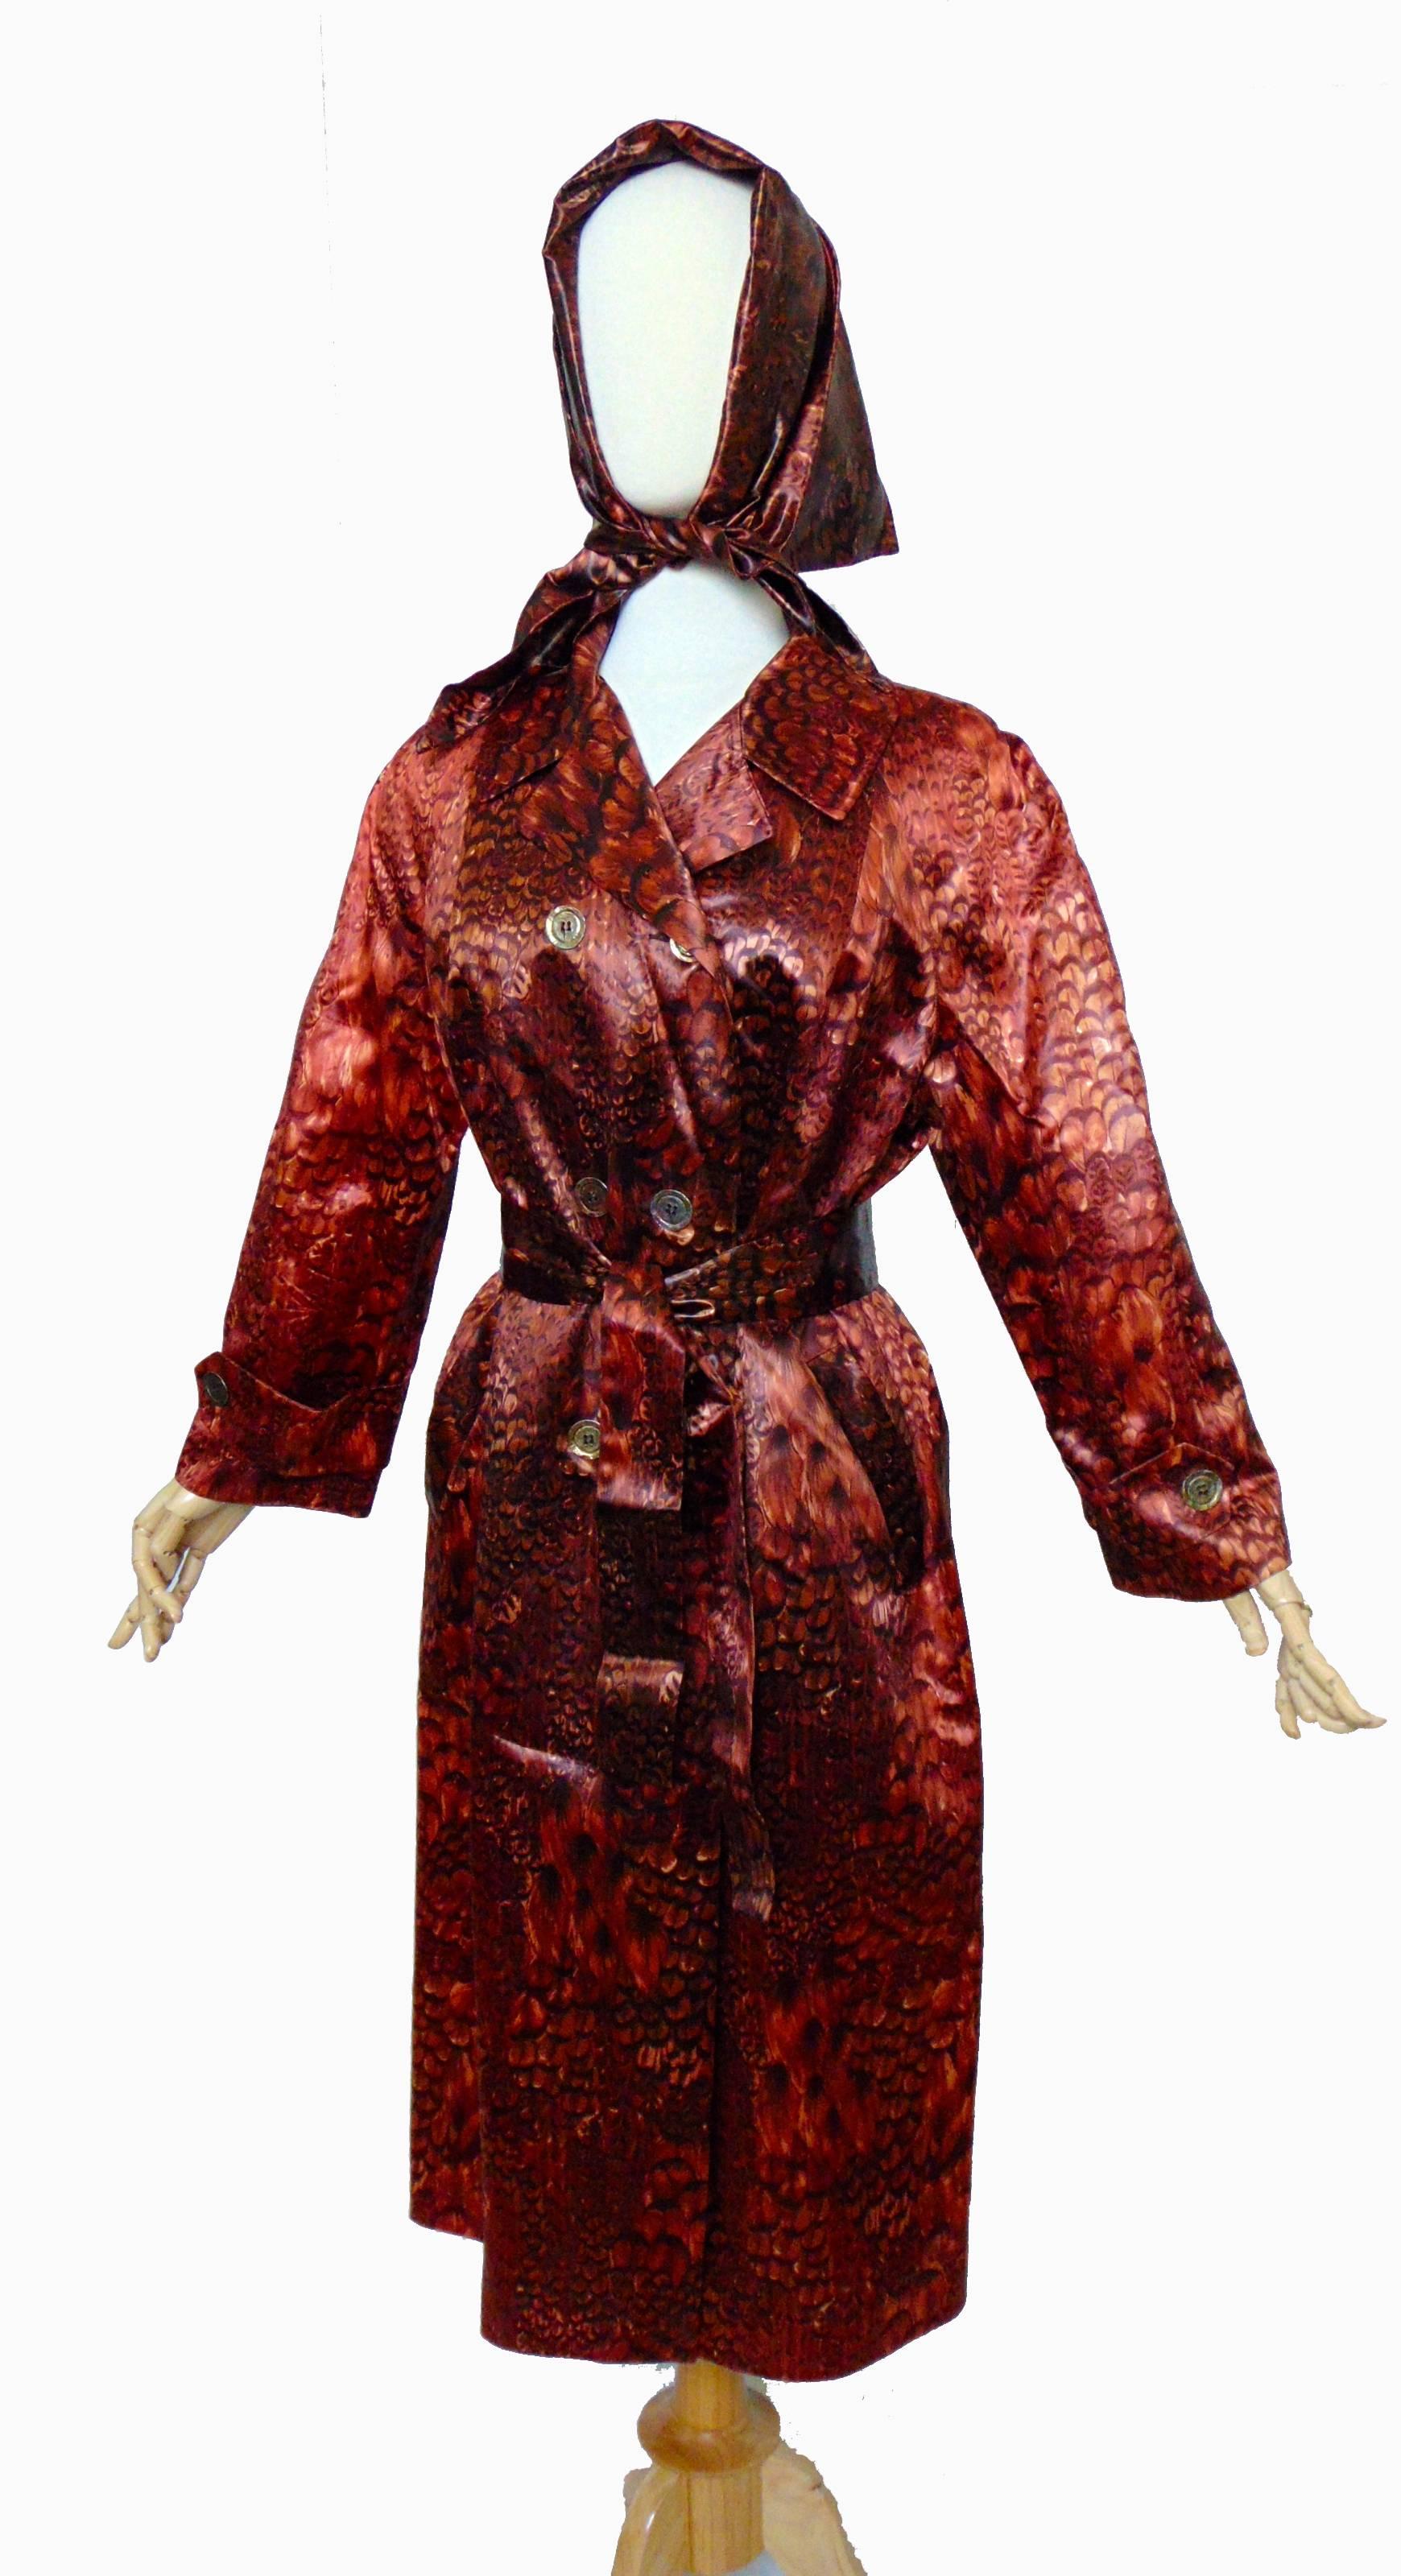 Lovely 3pc raincoat ensemble from the 1960s includes the coat, scarf and belt.  Label reads: Main Street Fashion Rain Sun Storm Coat.  Very unique feather print!  In perfect condition, new old stock without tags. No content label but feels